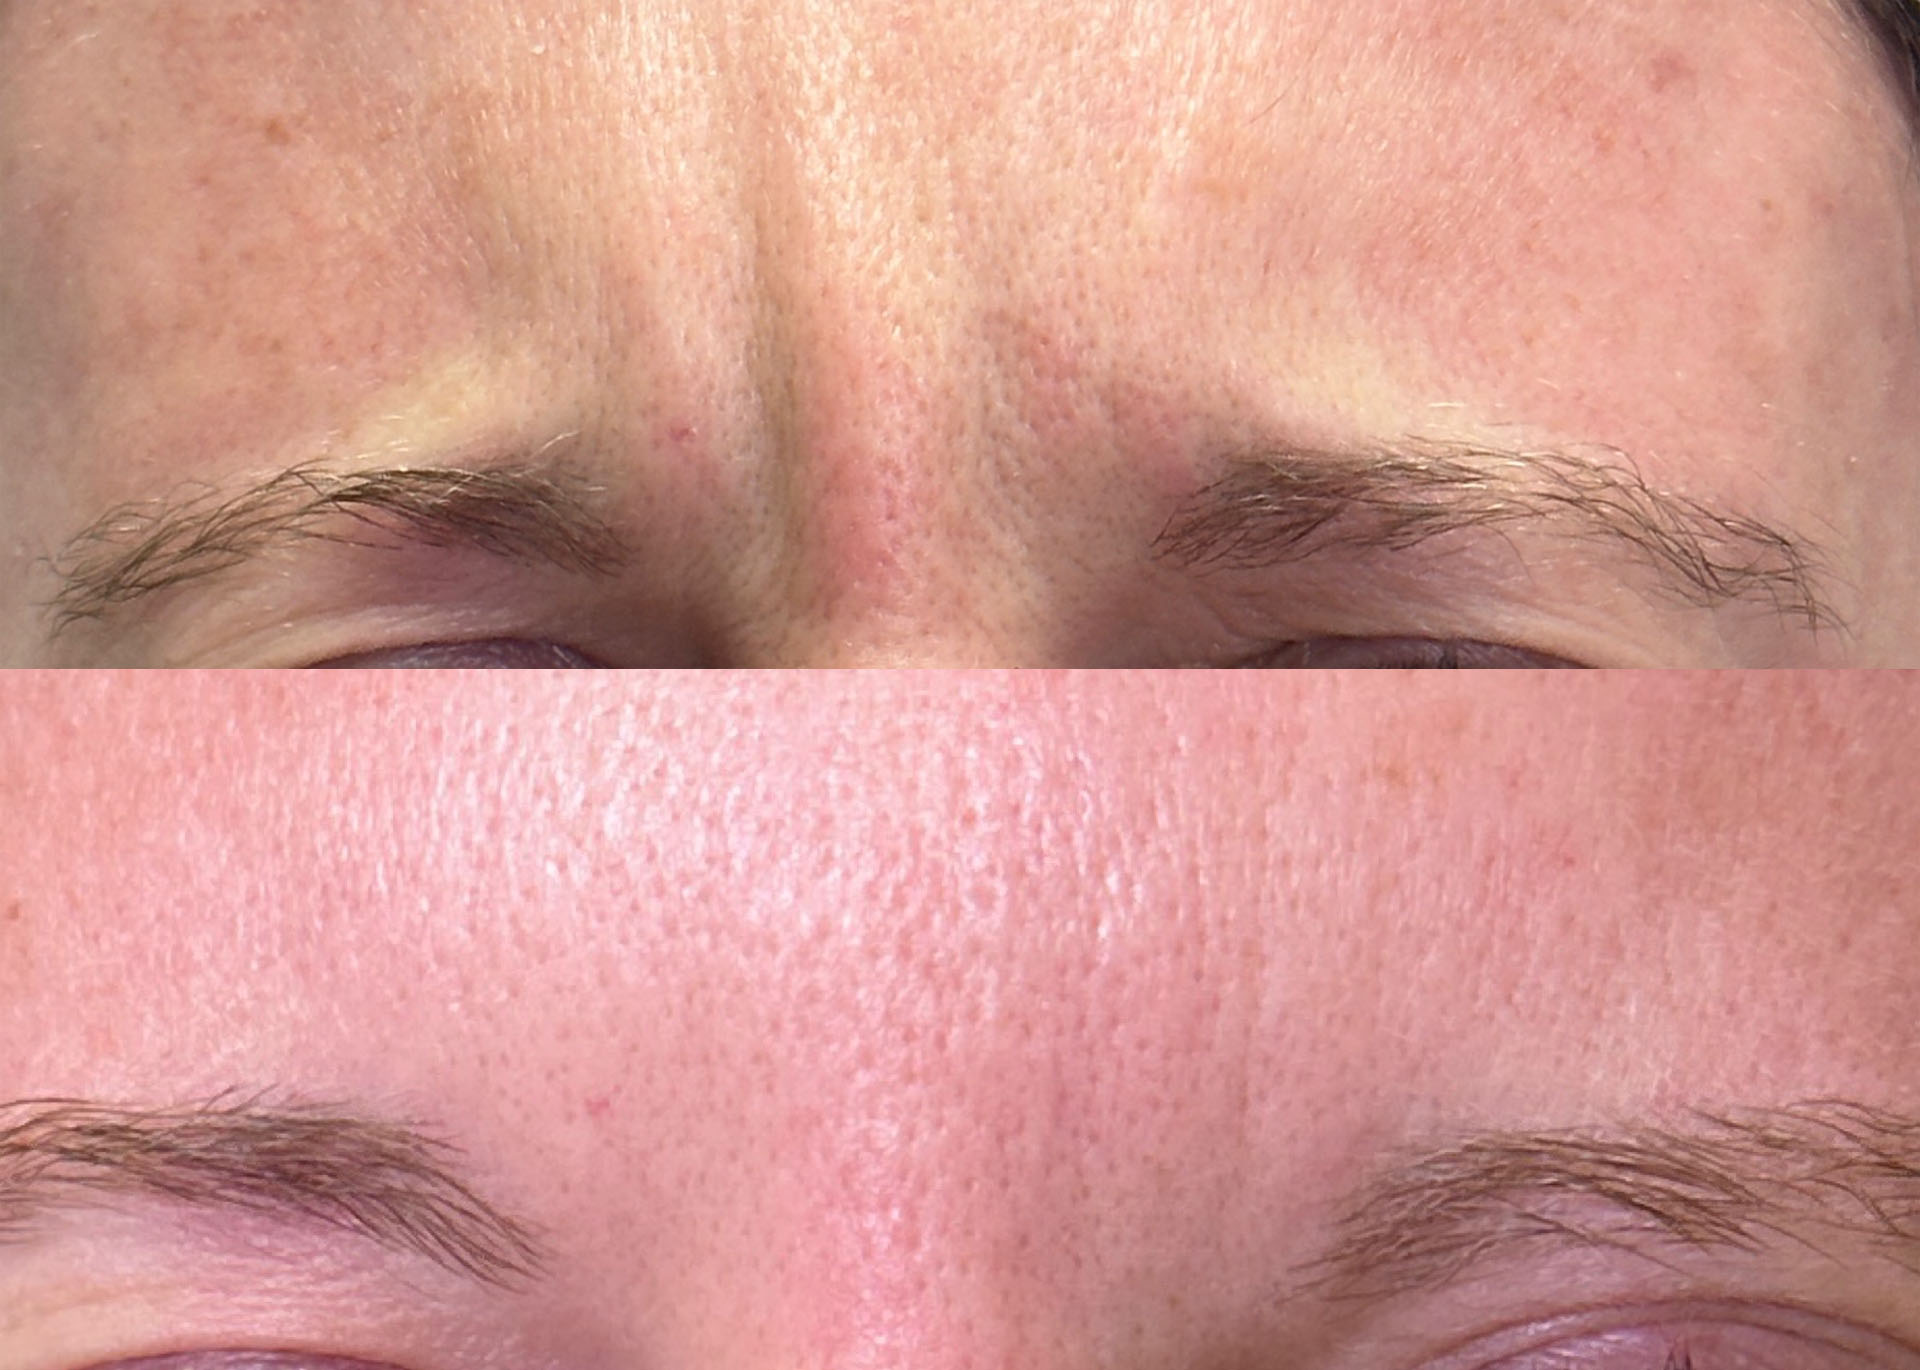 First 20 units of Botox: $179